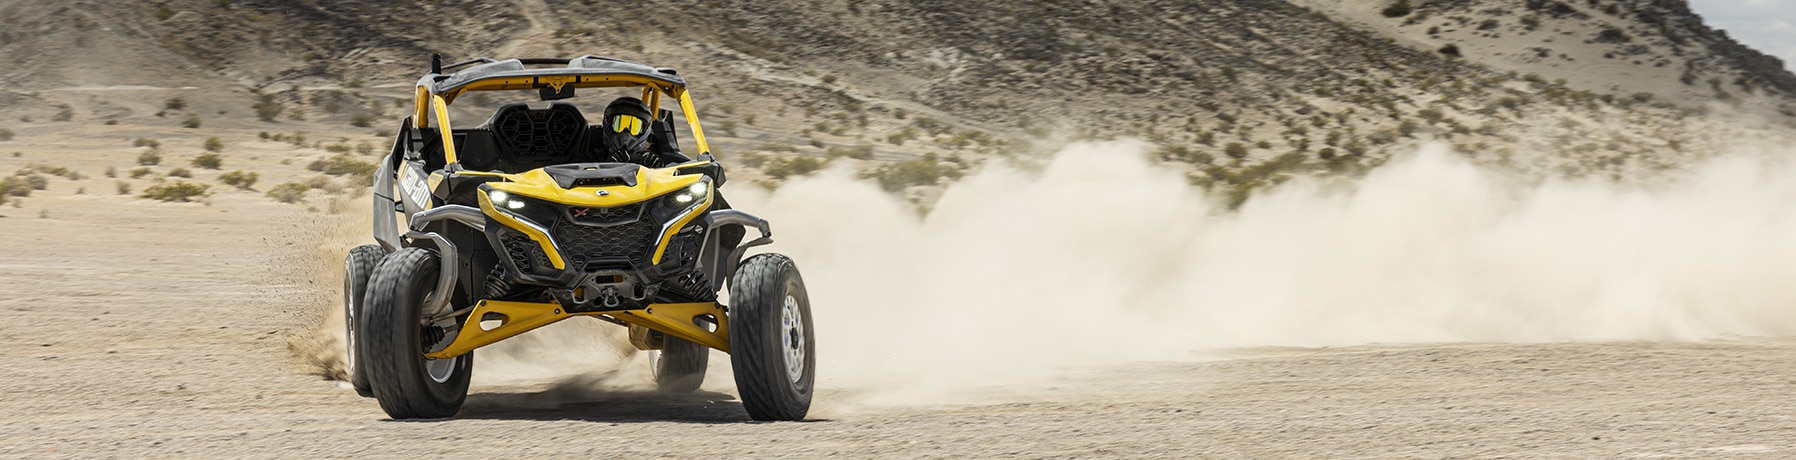 A rider driving a Can-Am Maverick R at high speed in the desert